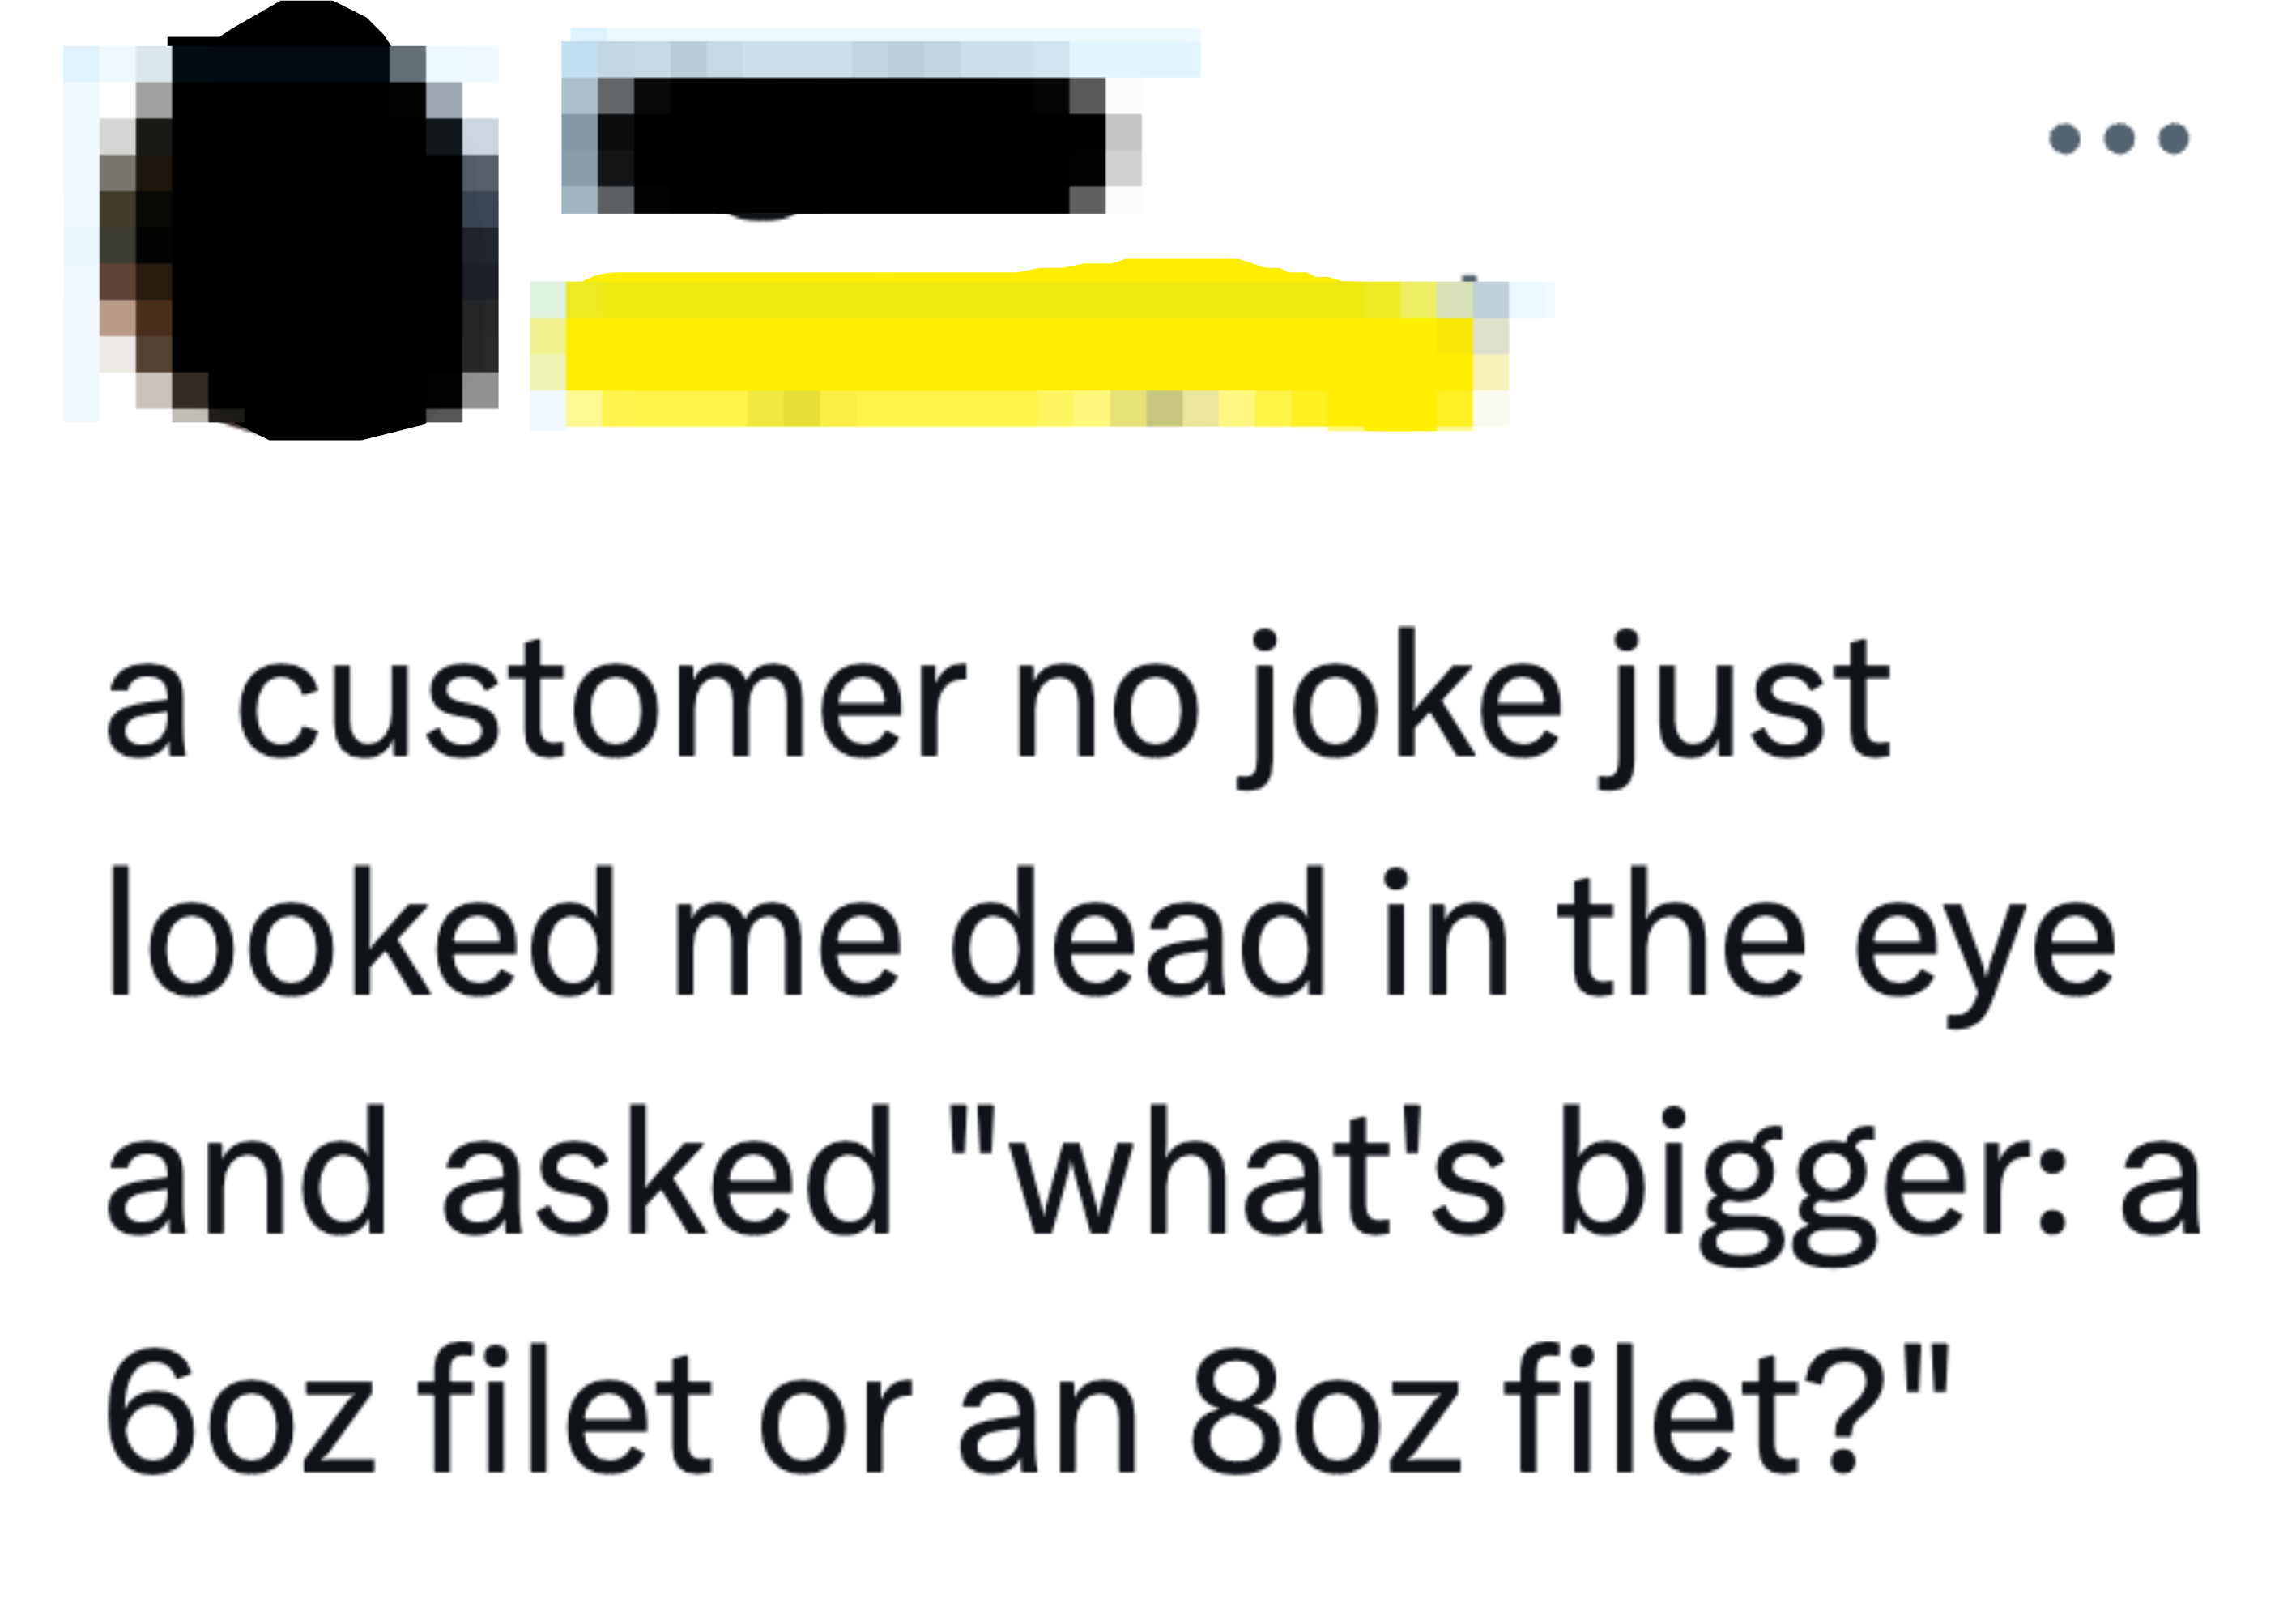 Tweet expressing disbelief over a customer not knowing the size difference between a 6oz and 8oz filet